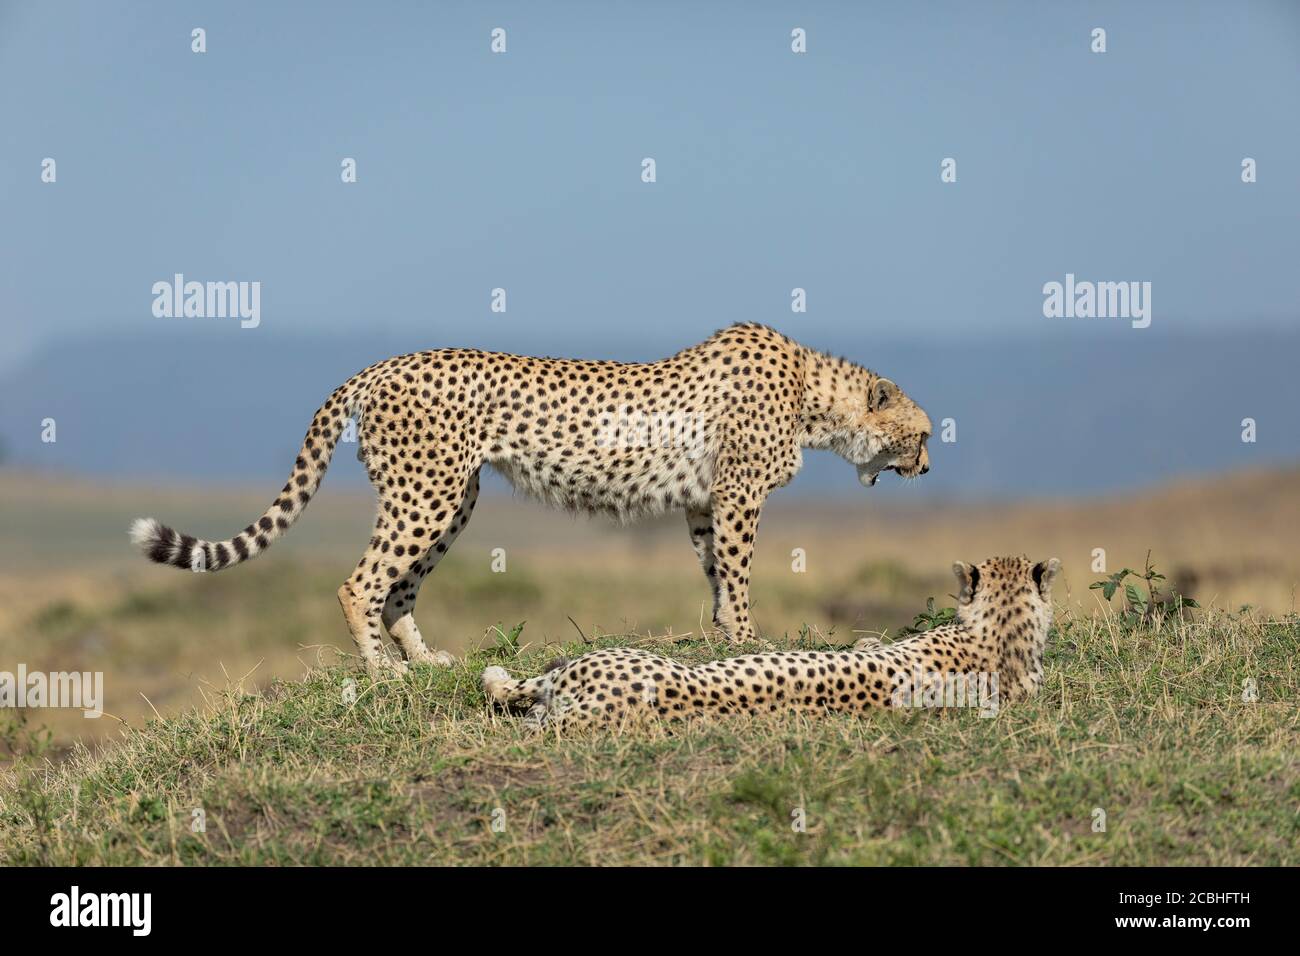 Two cheetahs resting in middle of a sunny day in Masai Mara Kenya with one standing side ways and the other lying down on grass Stock Photo